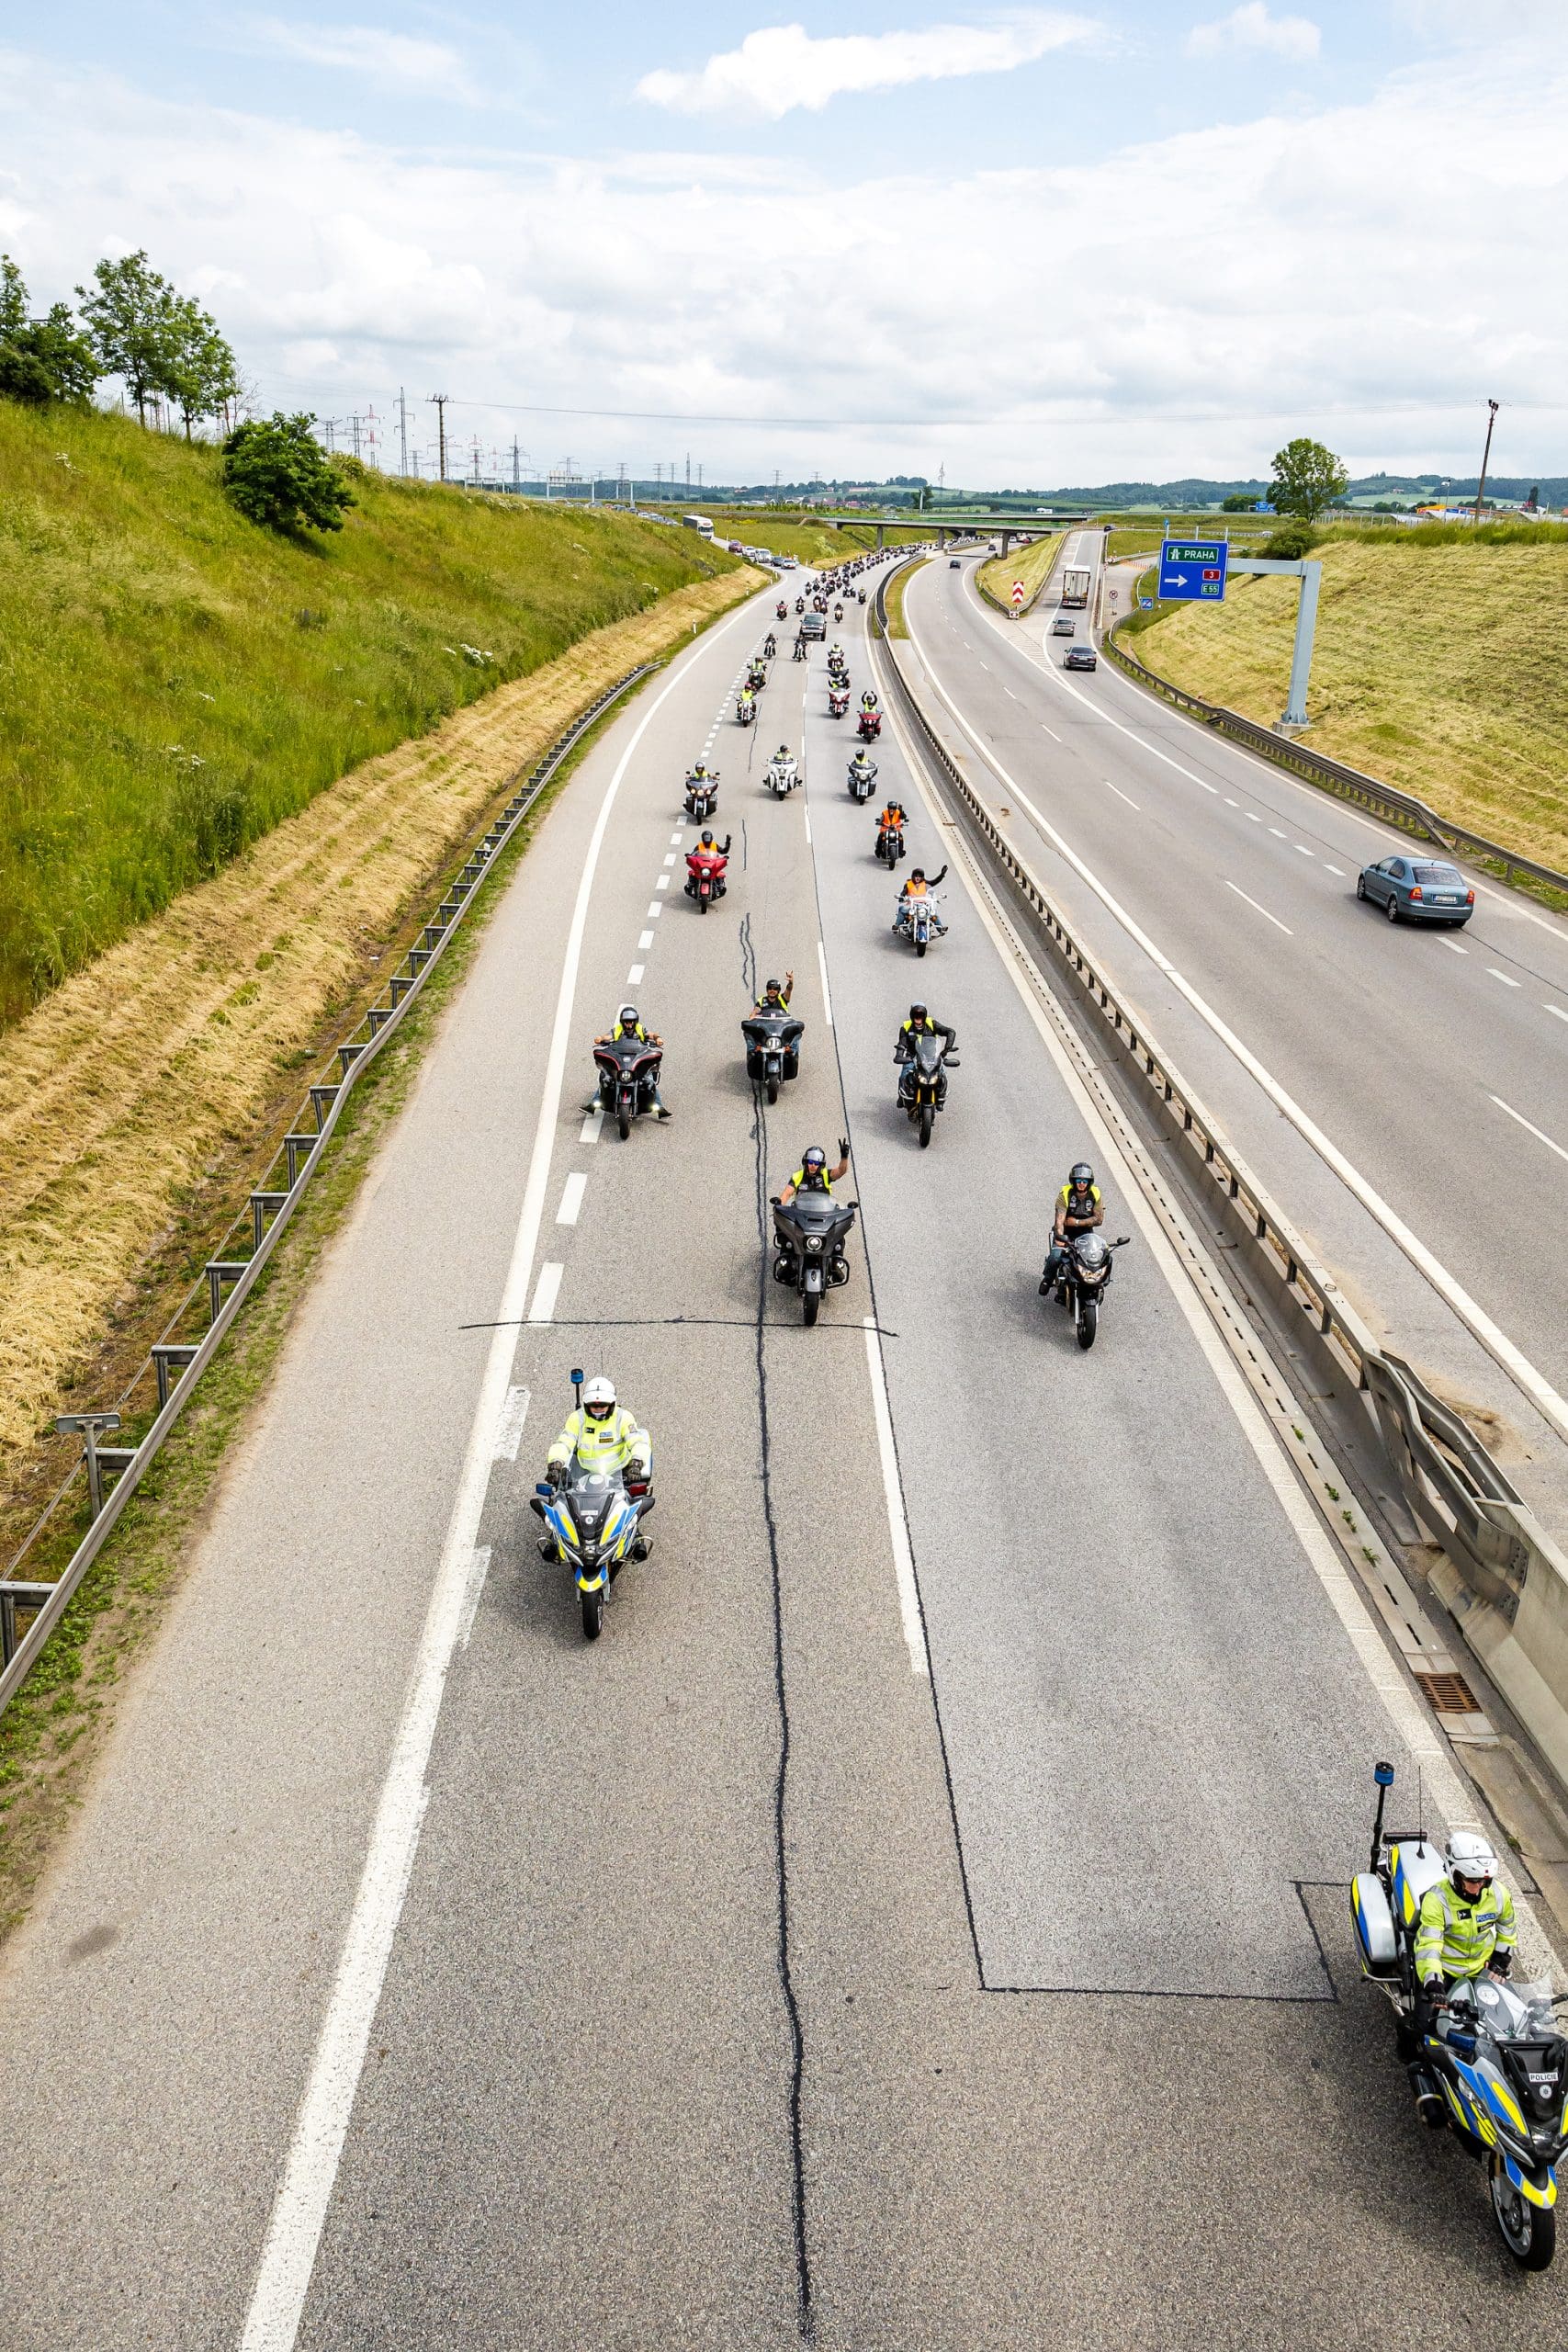 A view of 2023's Indian Riders' Fest. Media sourced from Indian Motorcycles' press release.